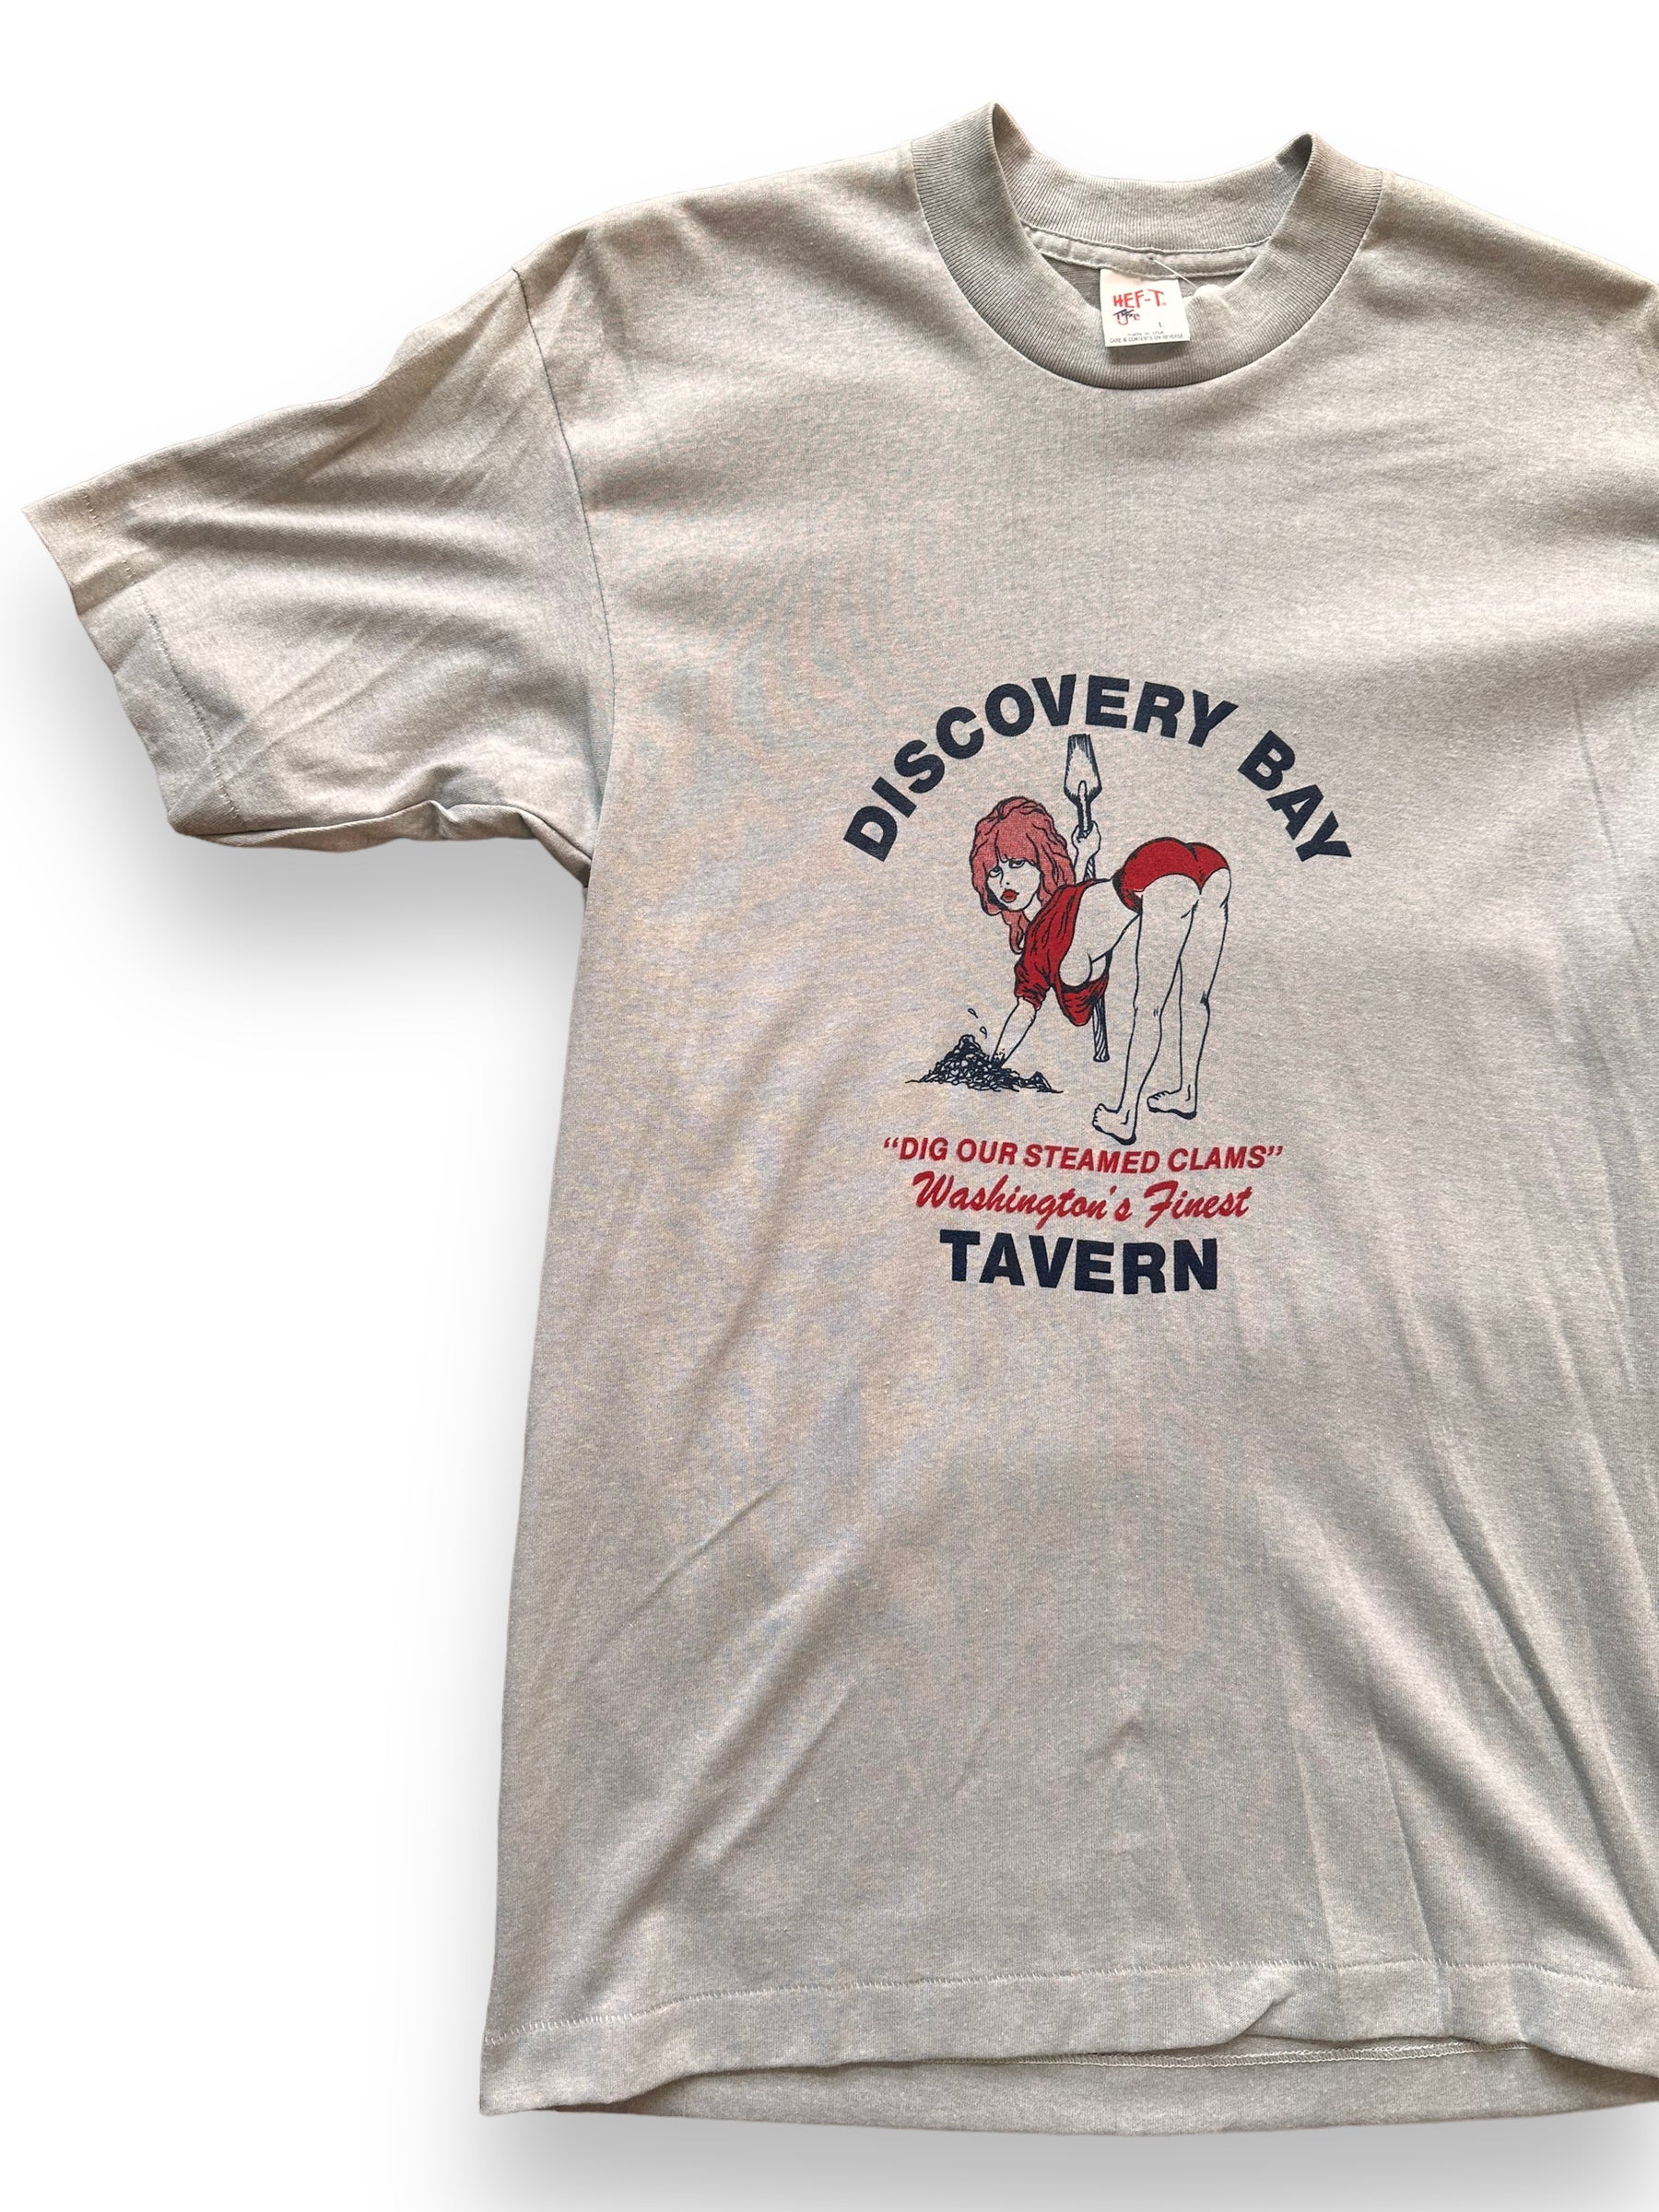 Front Right View of Vintage Discovery Bay Tavern Tee SZ S |  Vintage Port Townsend Steamed Clam Tee | Vintage Clothing Seattle